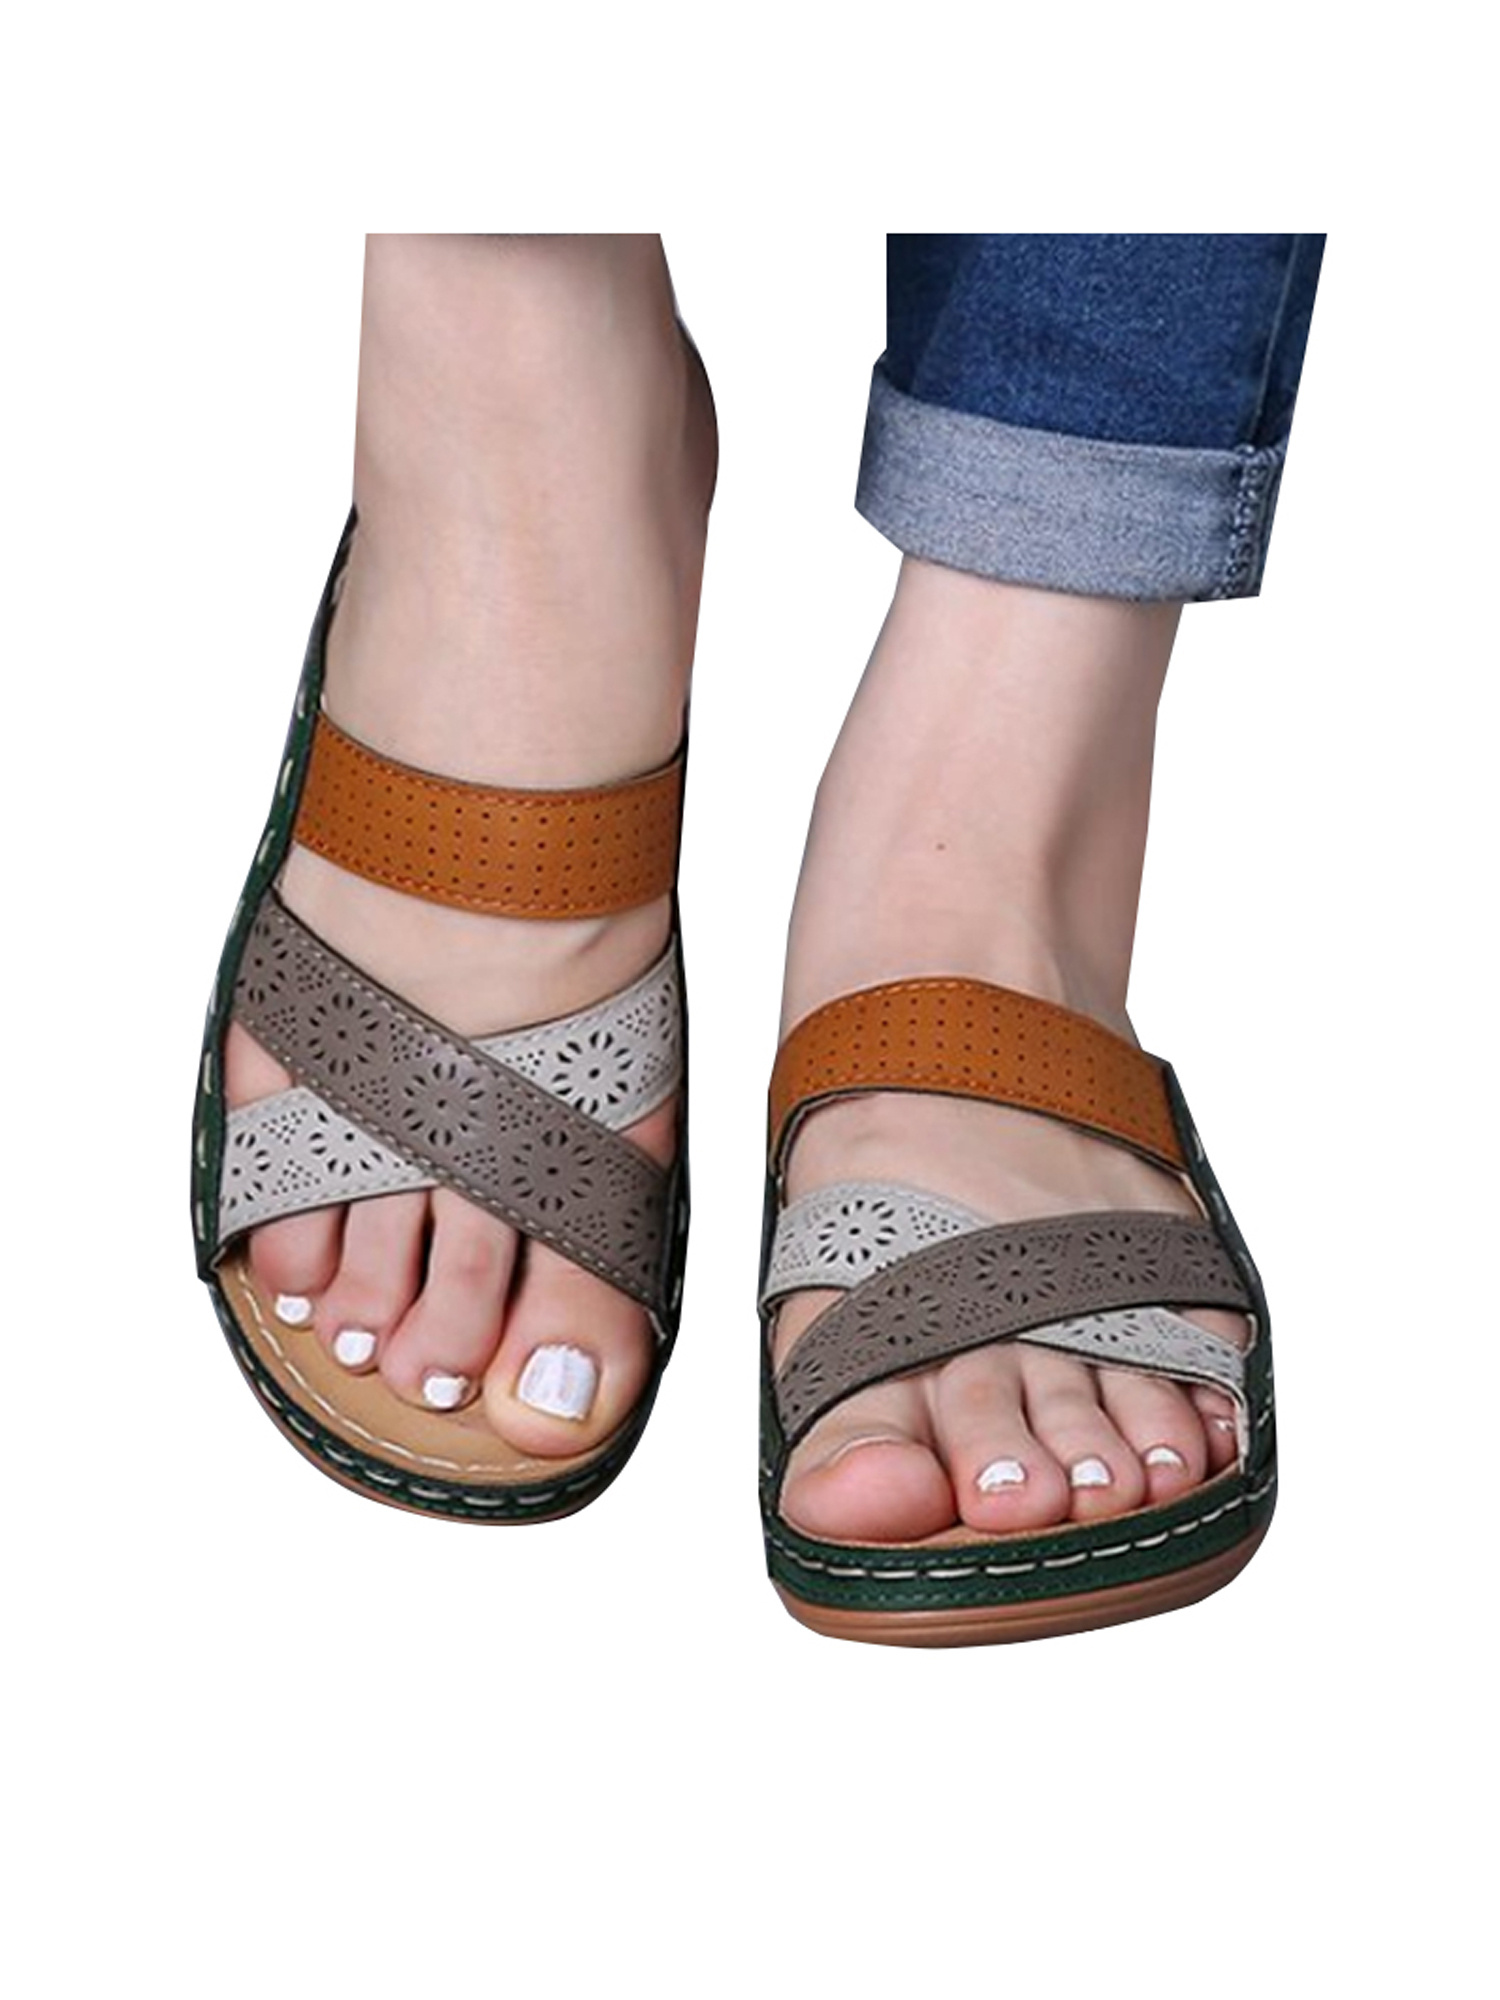 Women Flip Flop Slippers Casual Summer Comfy Orthopedic Shoes Ladies Ring Open Toe Non-Slip Slides Flat Sandals 